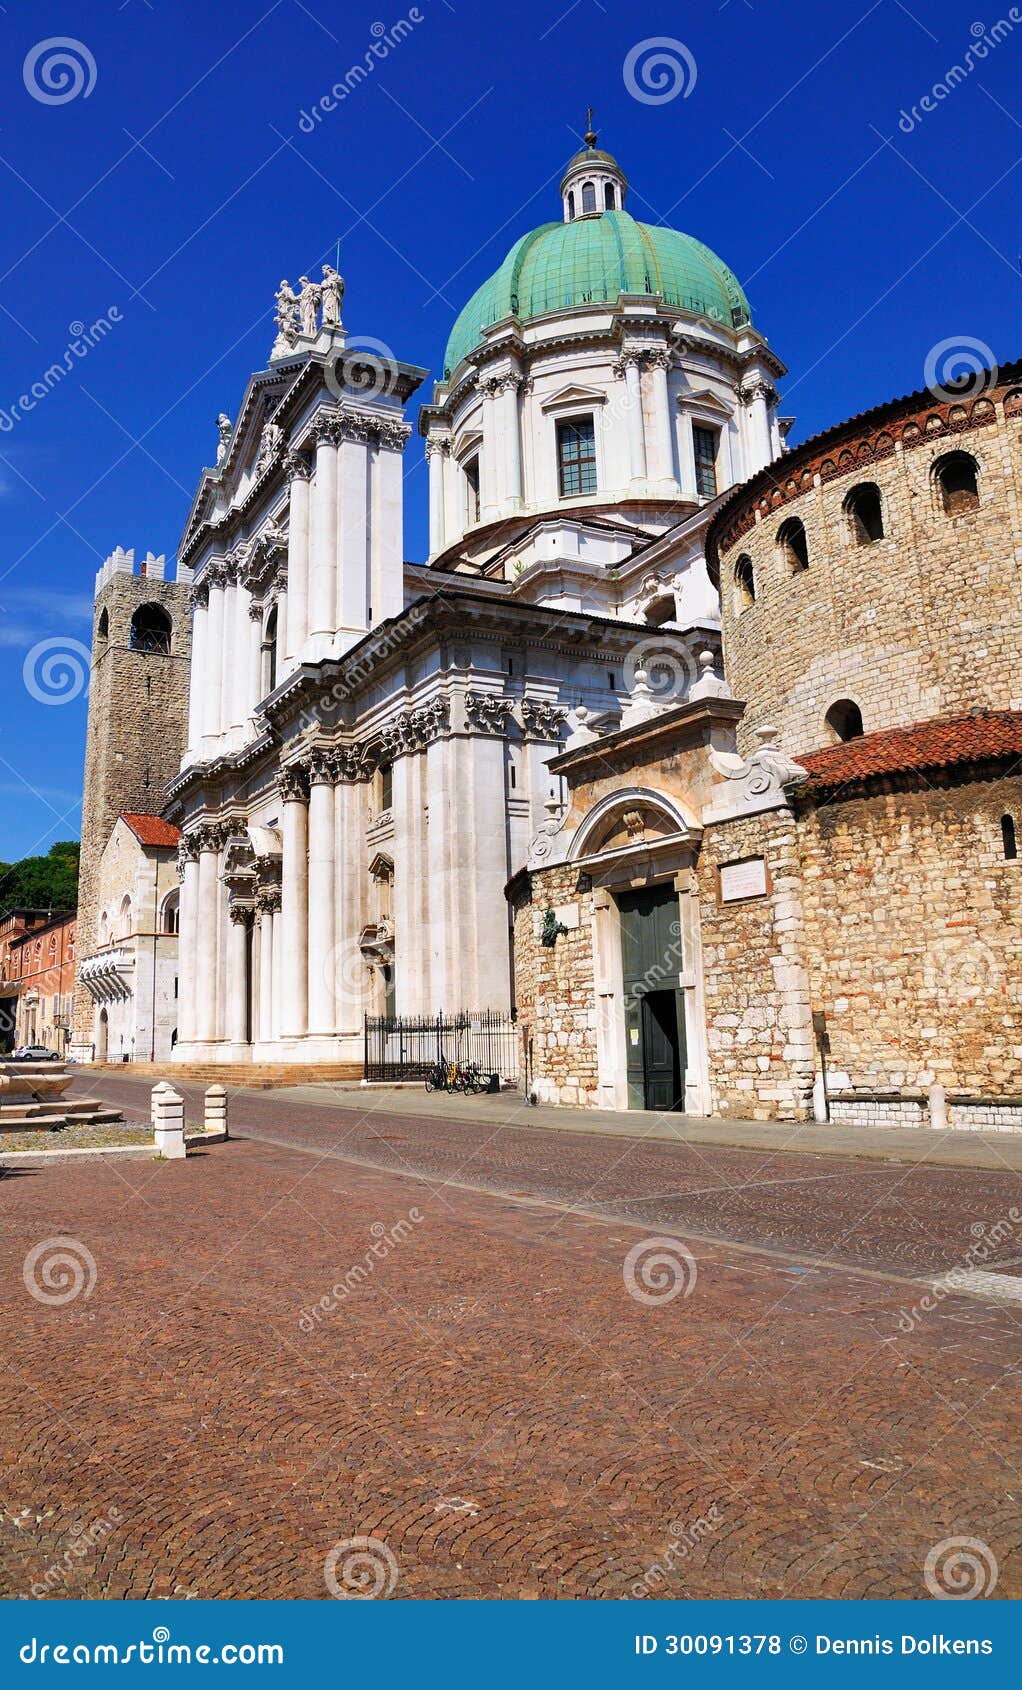 cathedral in brescia, italy